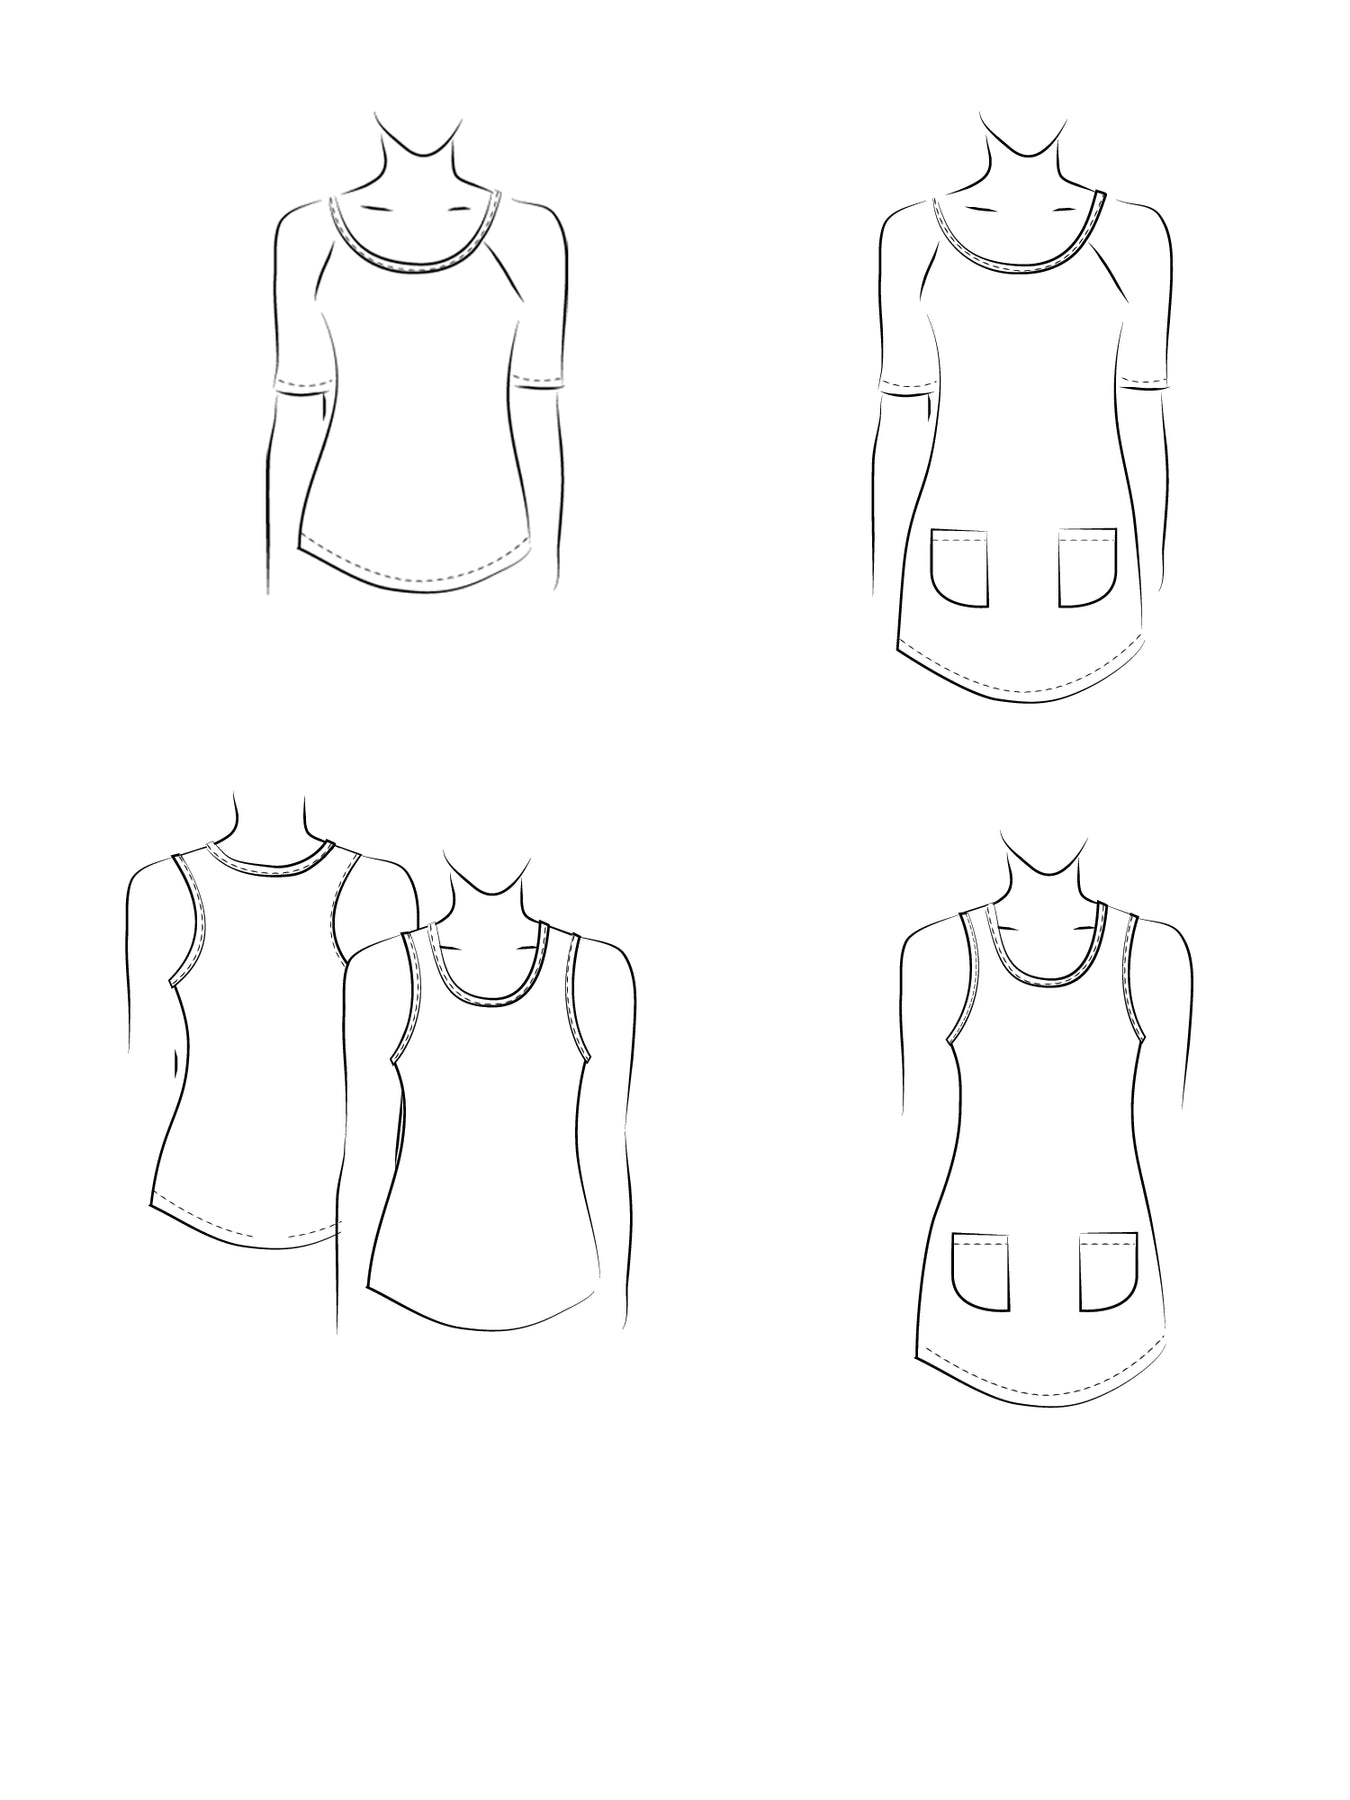 Raglan sleeve top, camisole and tunics 3245 | Paper pattern - Jalie